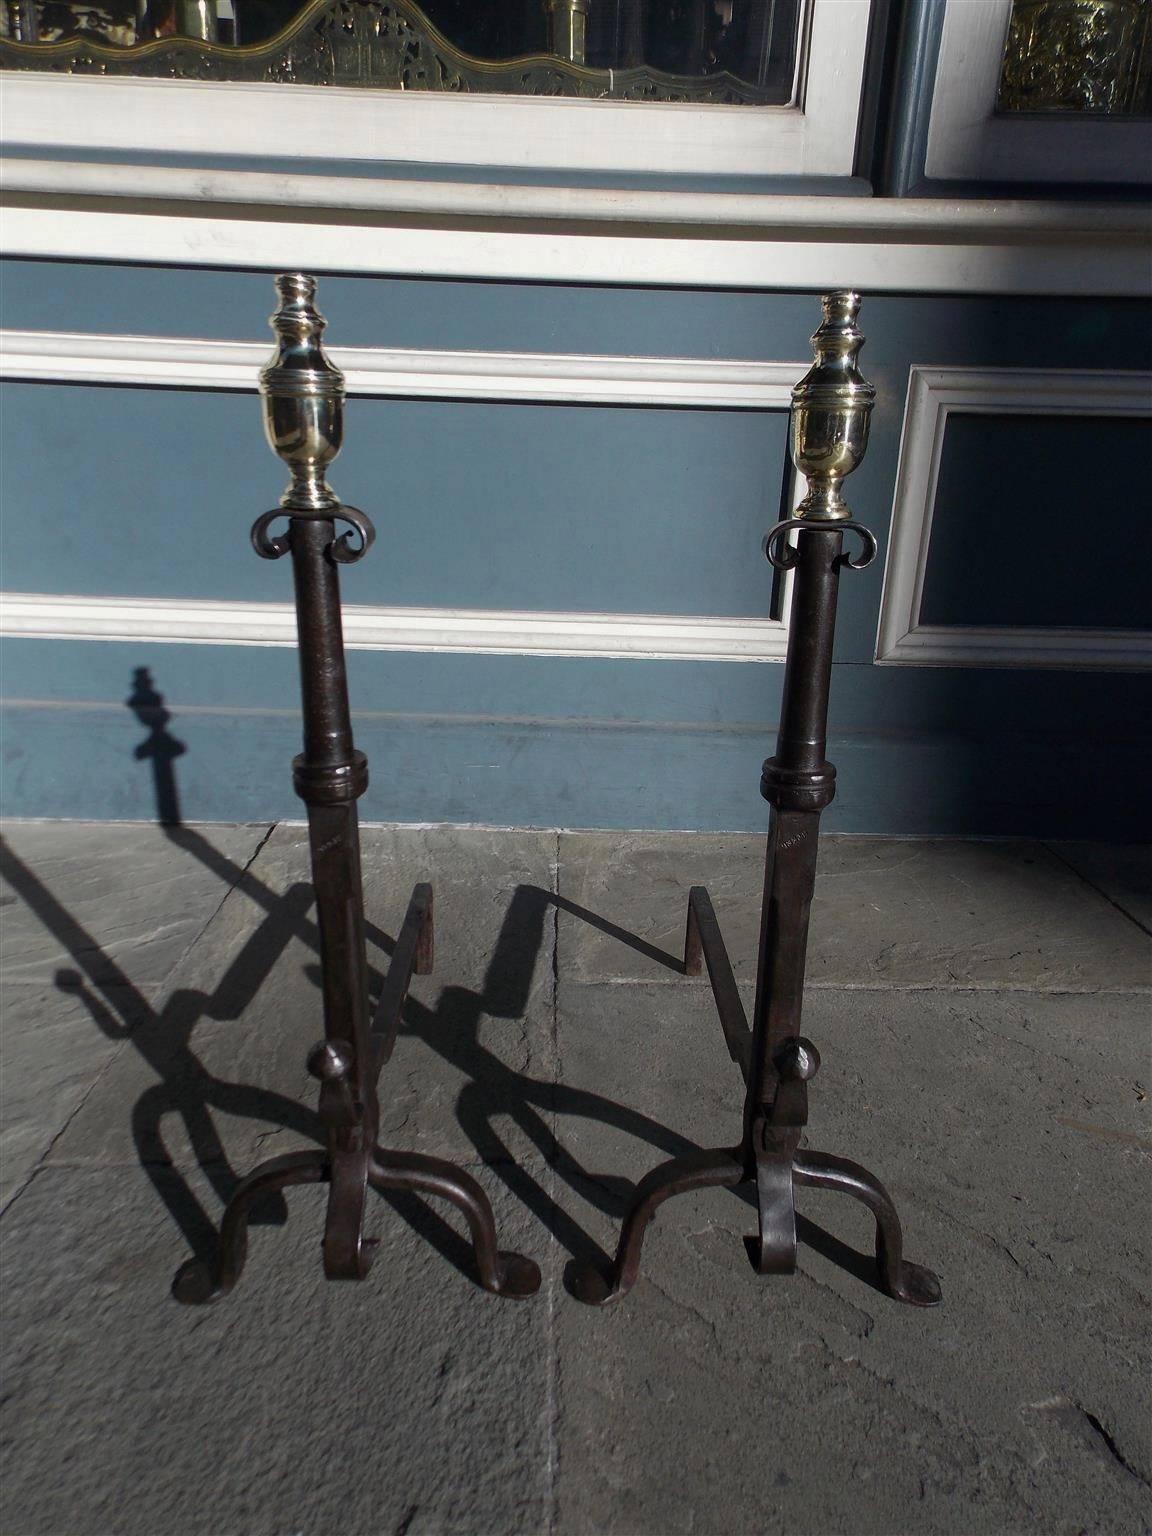 American wrought iron and brass andirons with urn top finials, scrolled circular squared plinths, spit hooks, and terminating on penny feet.  Late 18th Century.  
Center plinths were originally axles on a horse drawn carriage. 